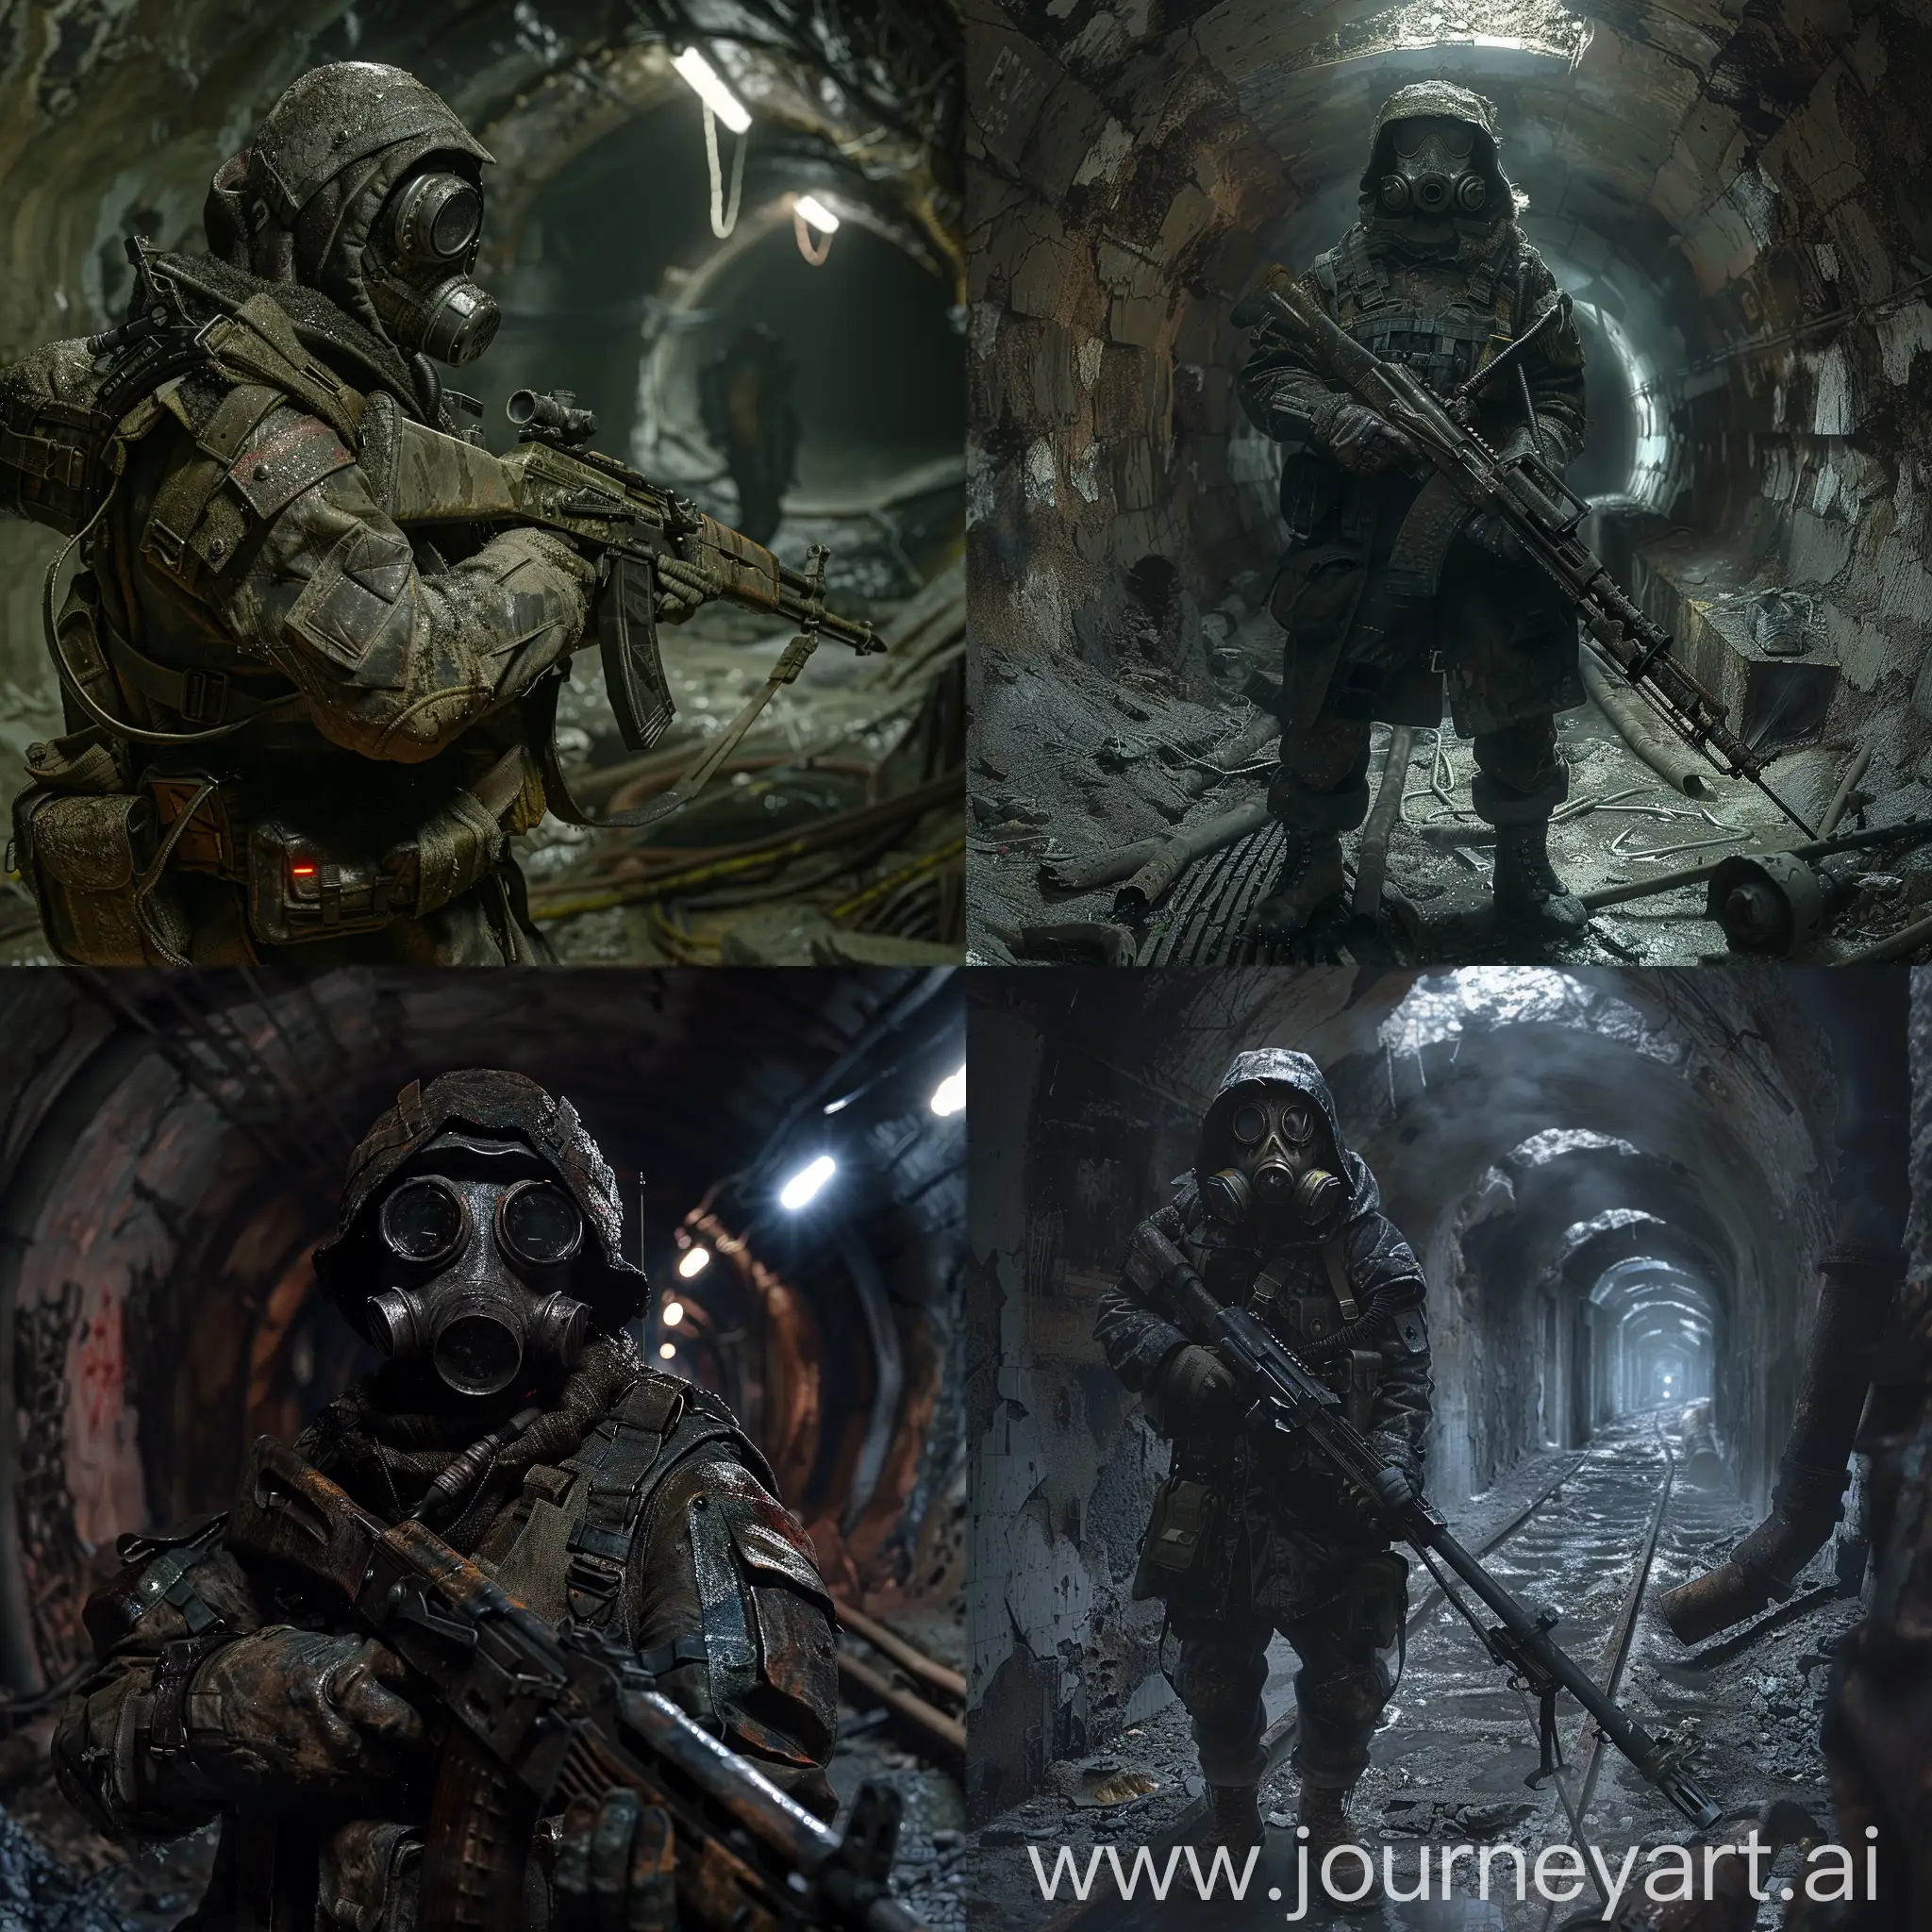 Survivor-in-PostApocalyptic-Armor-and-Gas-Mask-with-Soviet-Sniper-Rifle-in-Abandoned-Catacombs